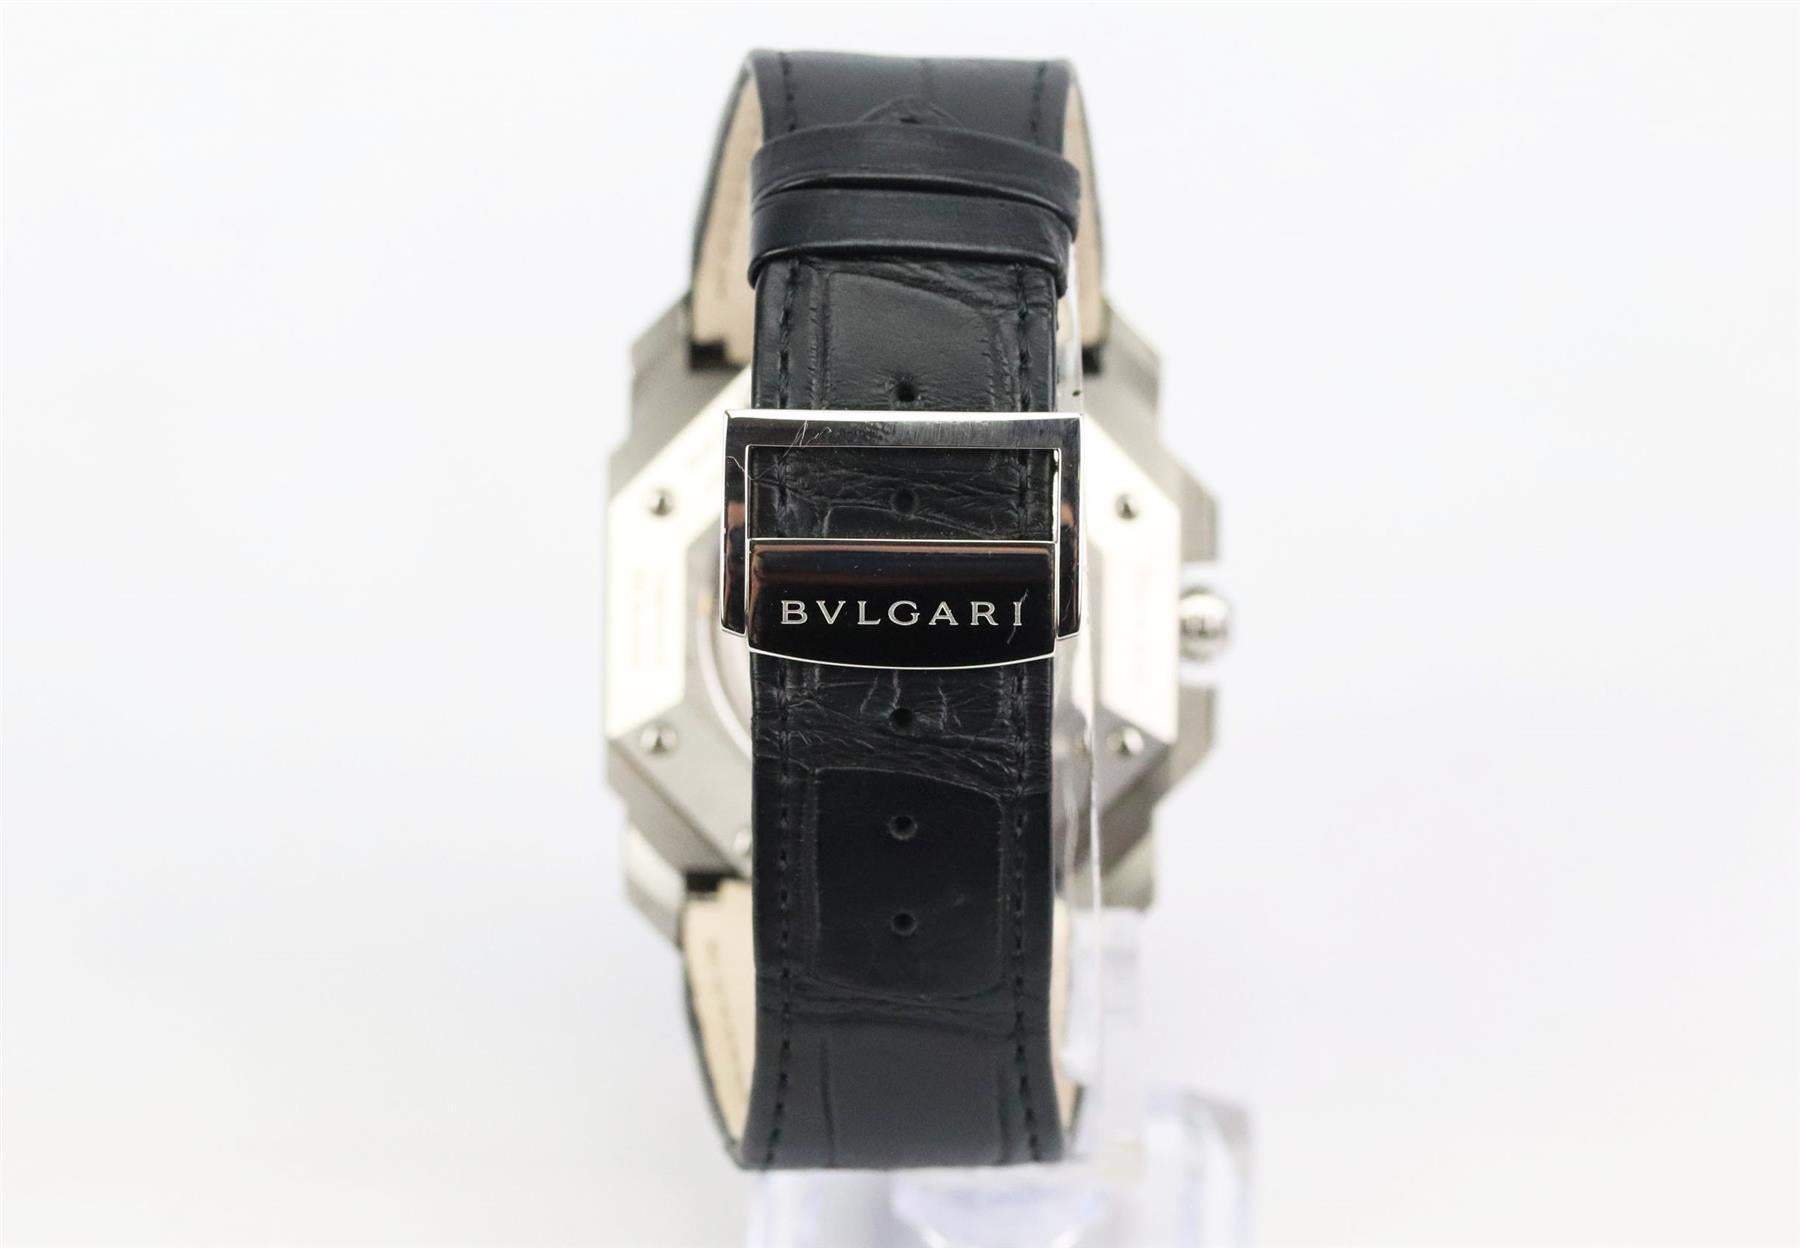 Bvlgari Octo Verlcissimo 42MM Stainless Steel And Alligator Watch  In Excellent Condition For Sale In London, GB